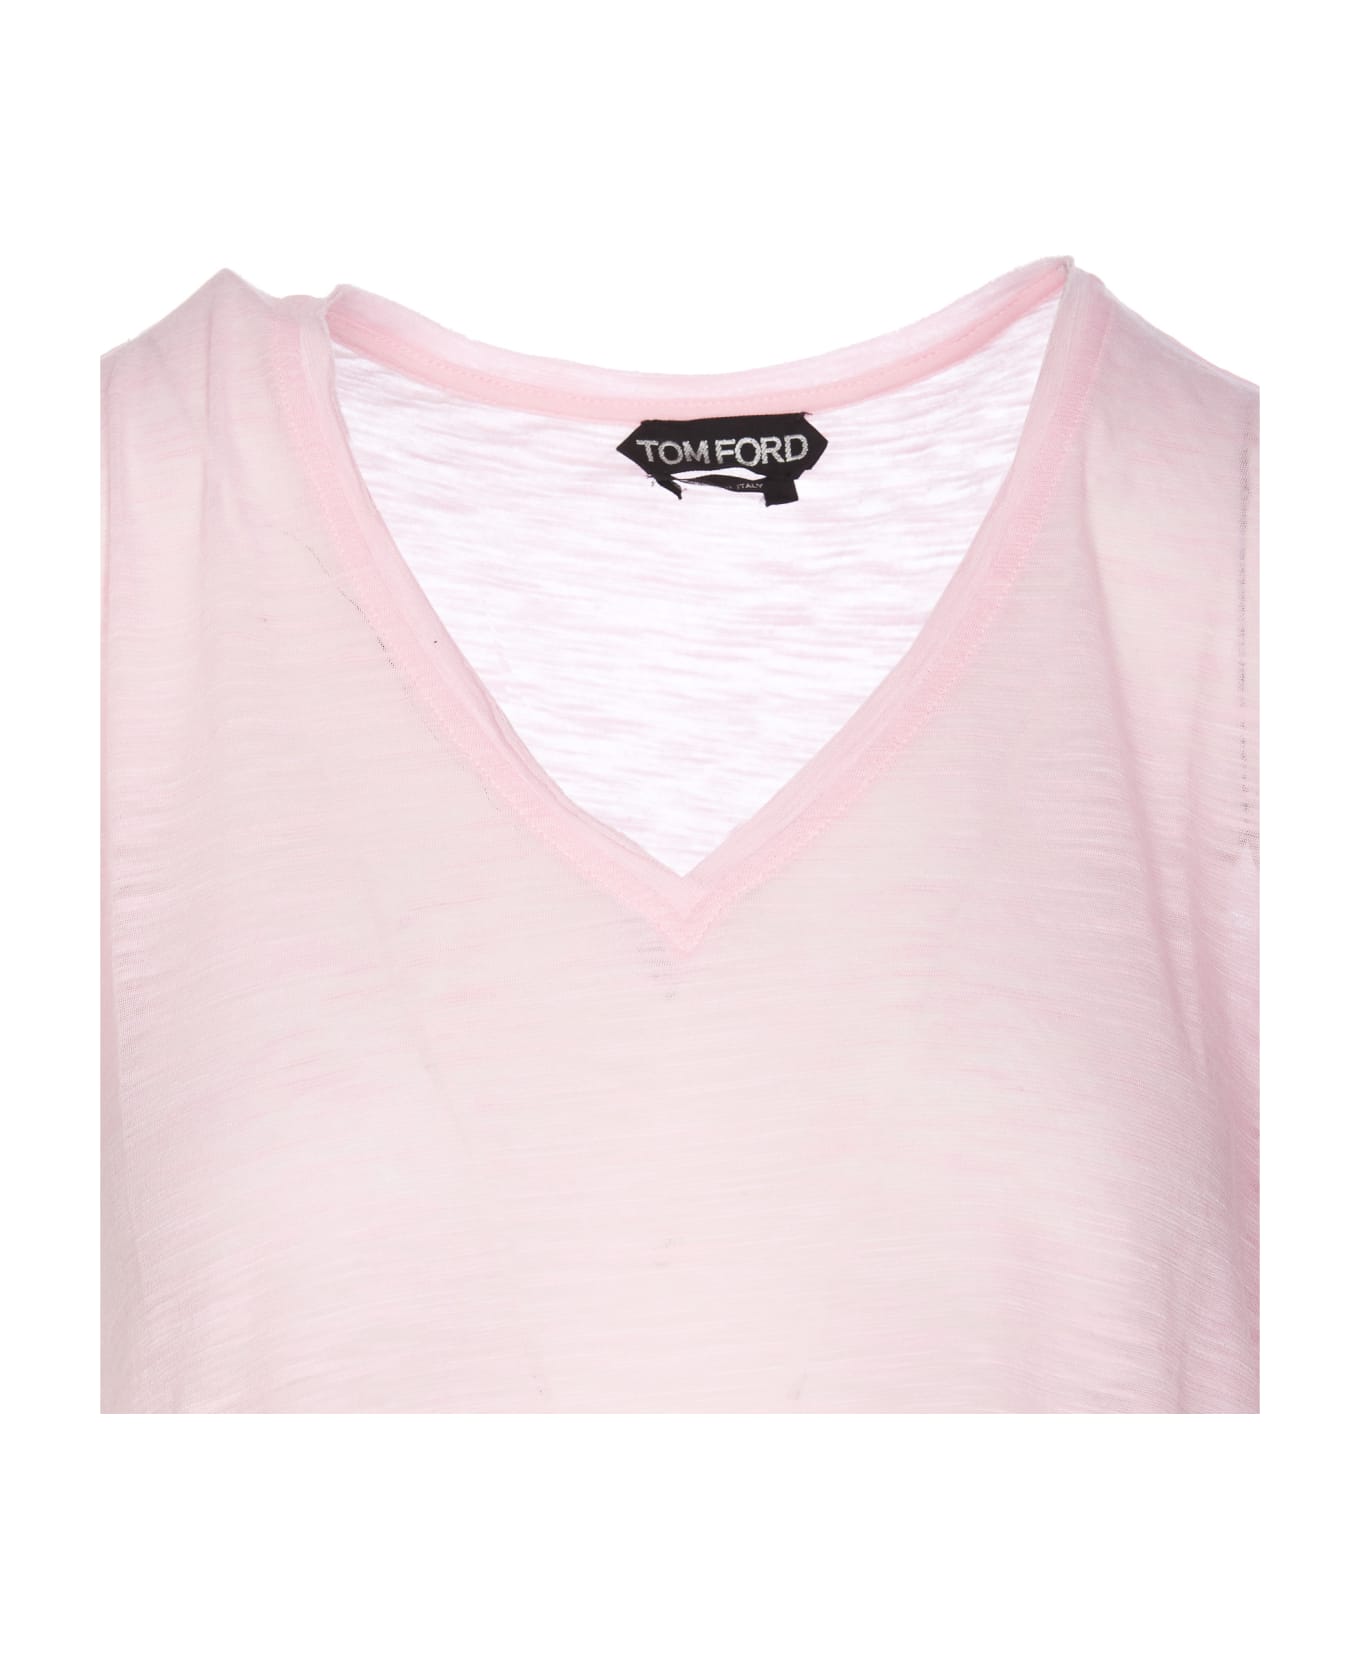 Tom Ford T-shirt - Pink